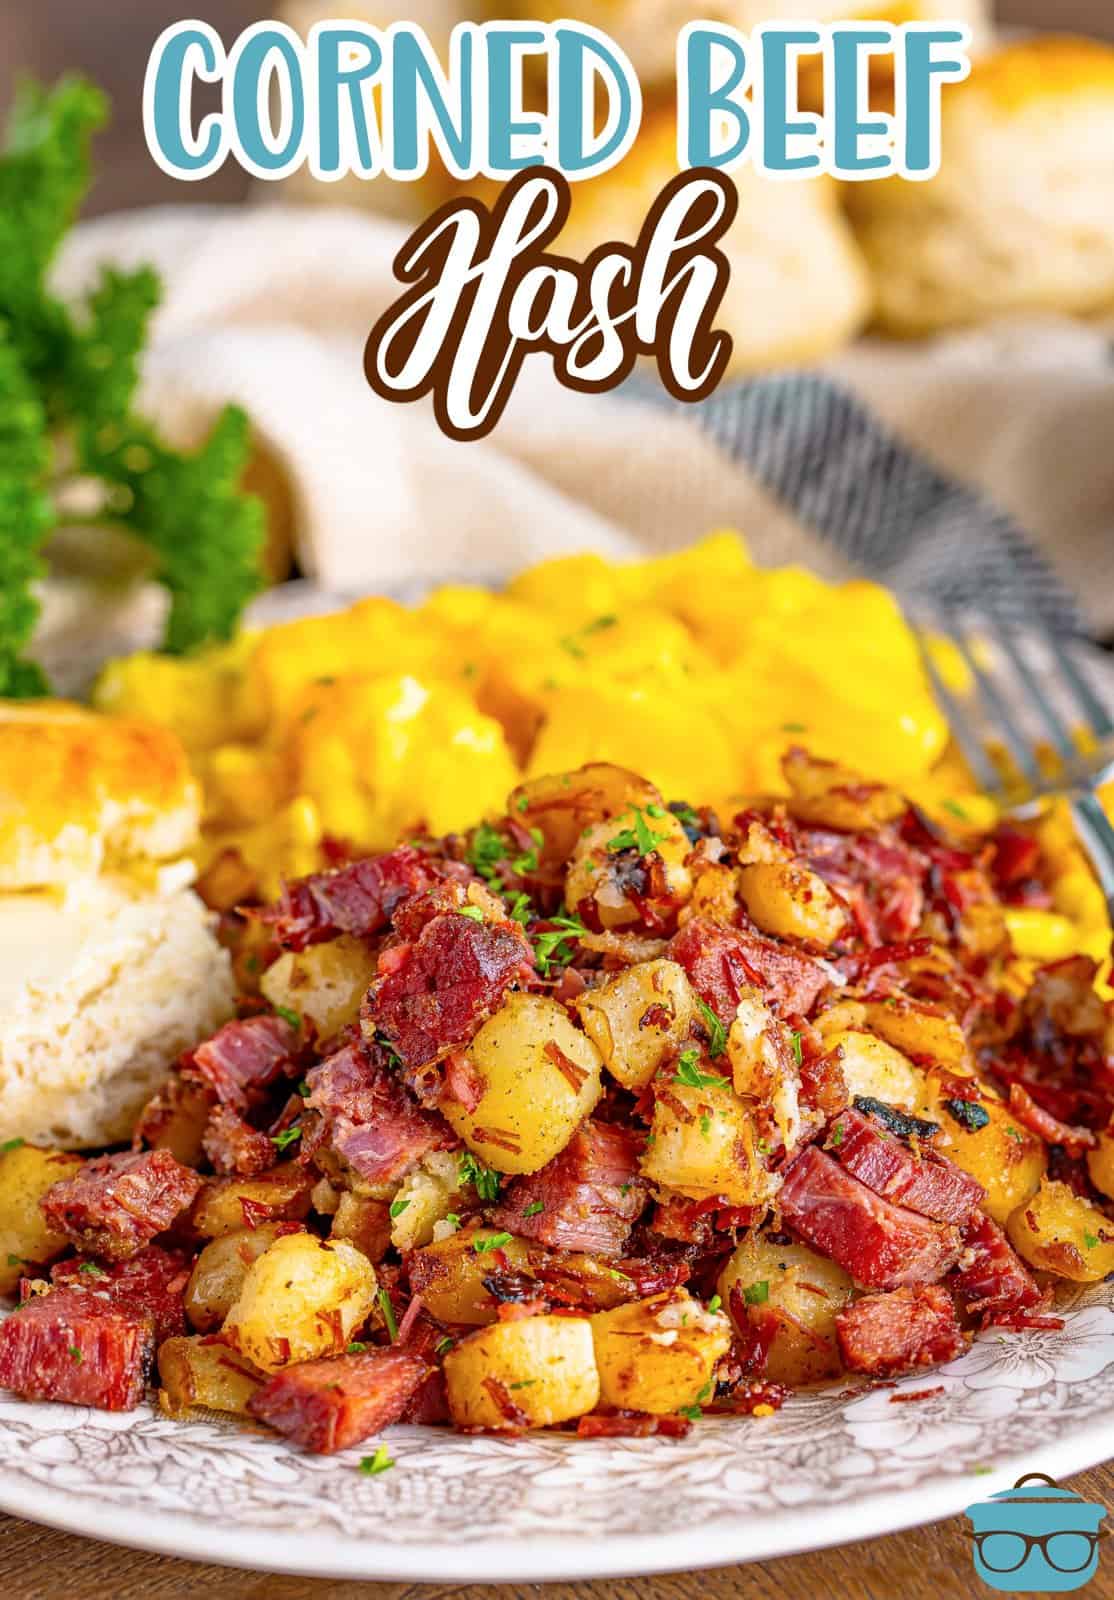 A plate of corned beef hash with other side dishes.